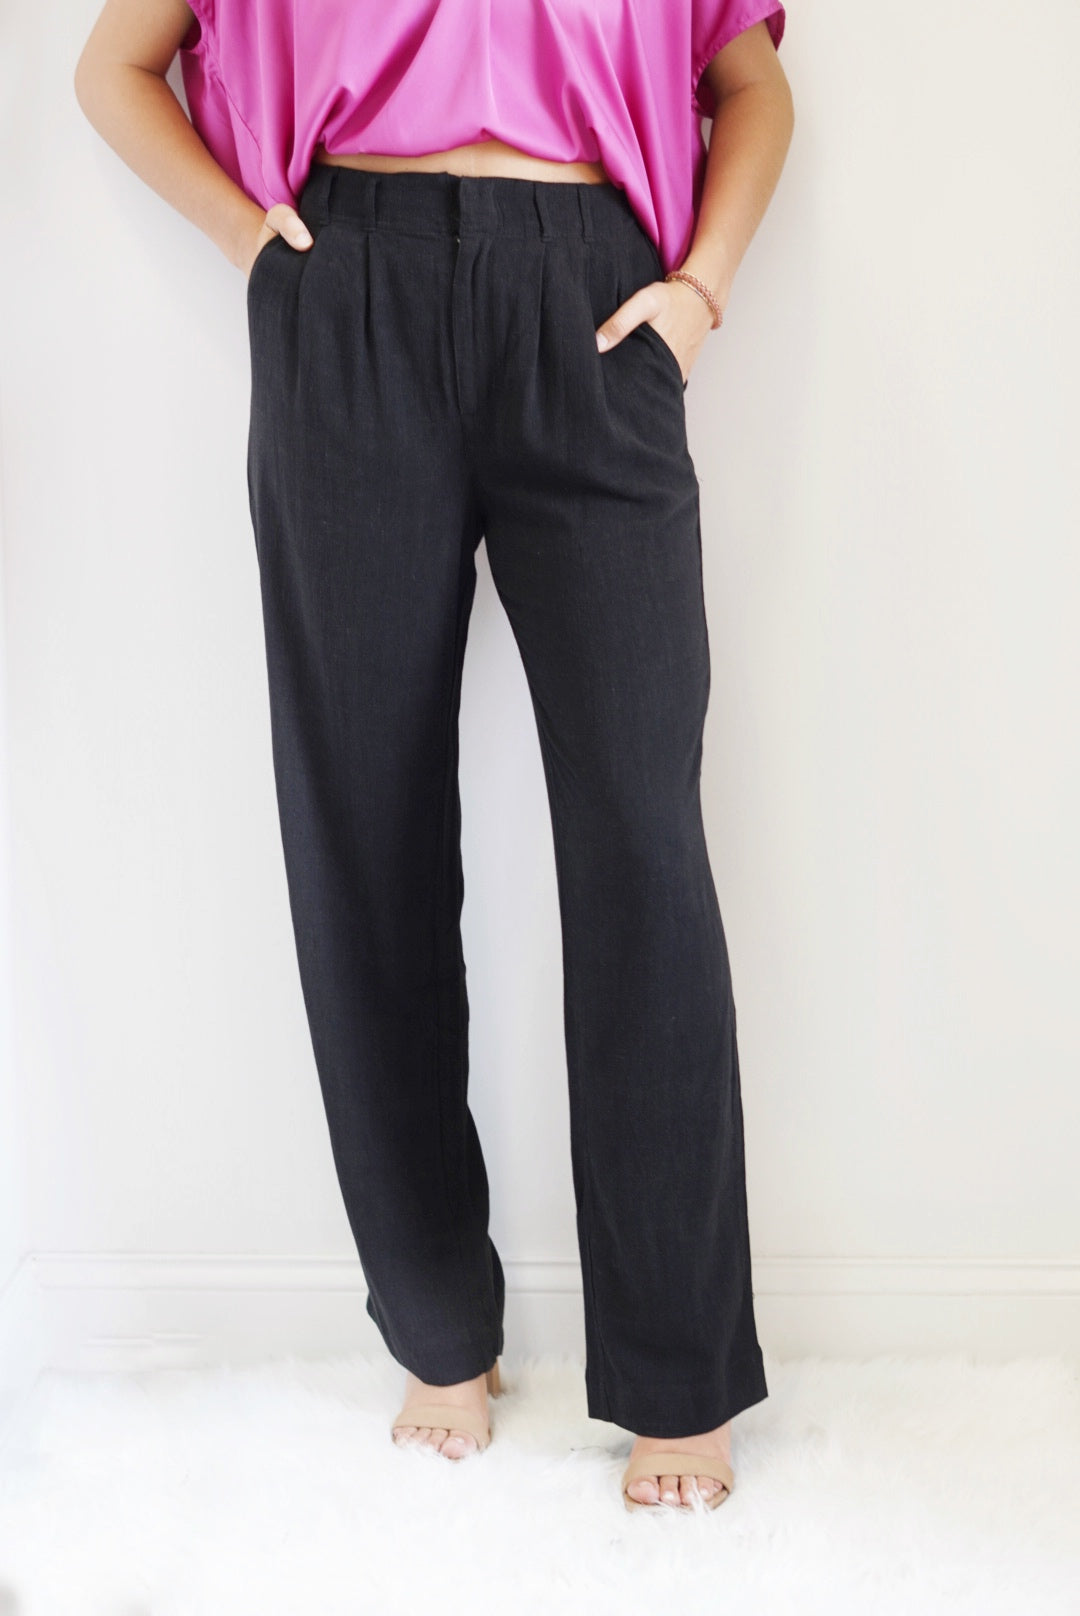 Farah Trouser Pant Full Ankle Length Relaxed Fit Belt Loops Colors: Black, Sand  Machine wash, turn inside out, gentle cycle, wash dark color separately, do not bleach, hang to dry, warm iron if needed Rayon Linen: 86% Rayon 14% Linen  Model is wearing a size small